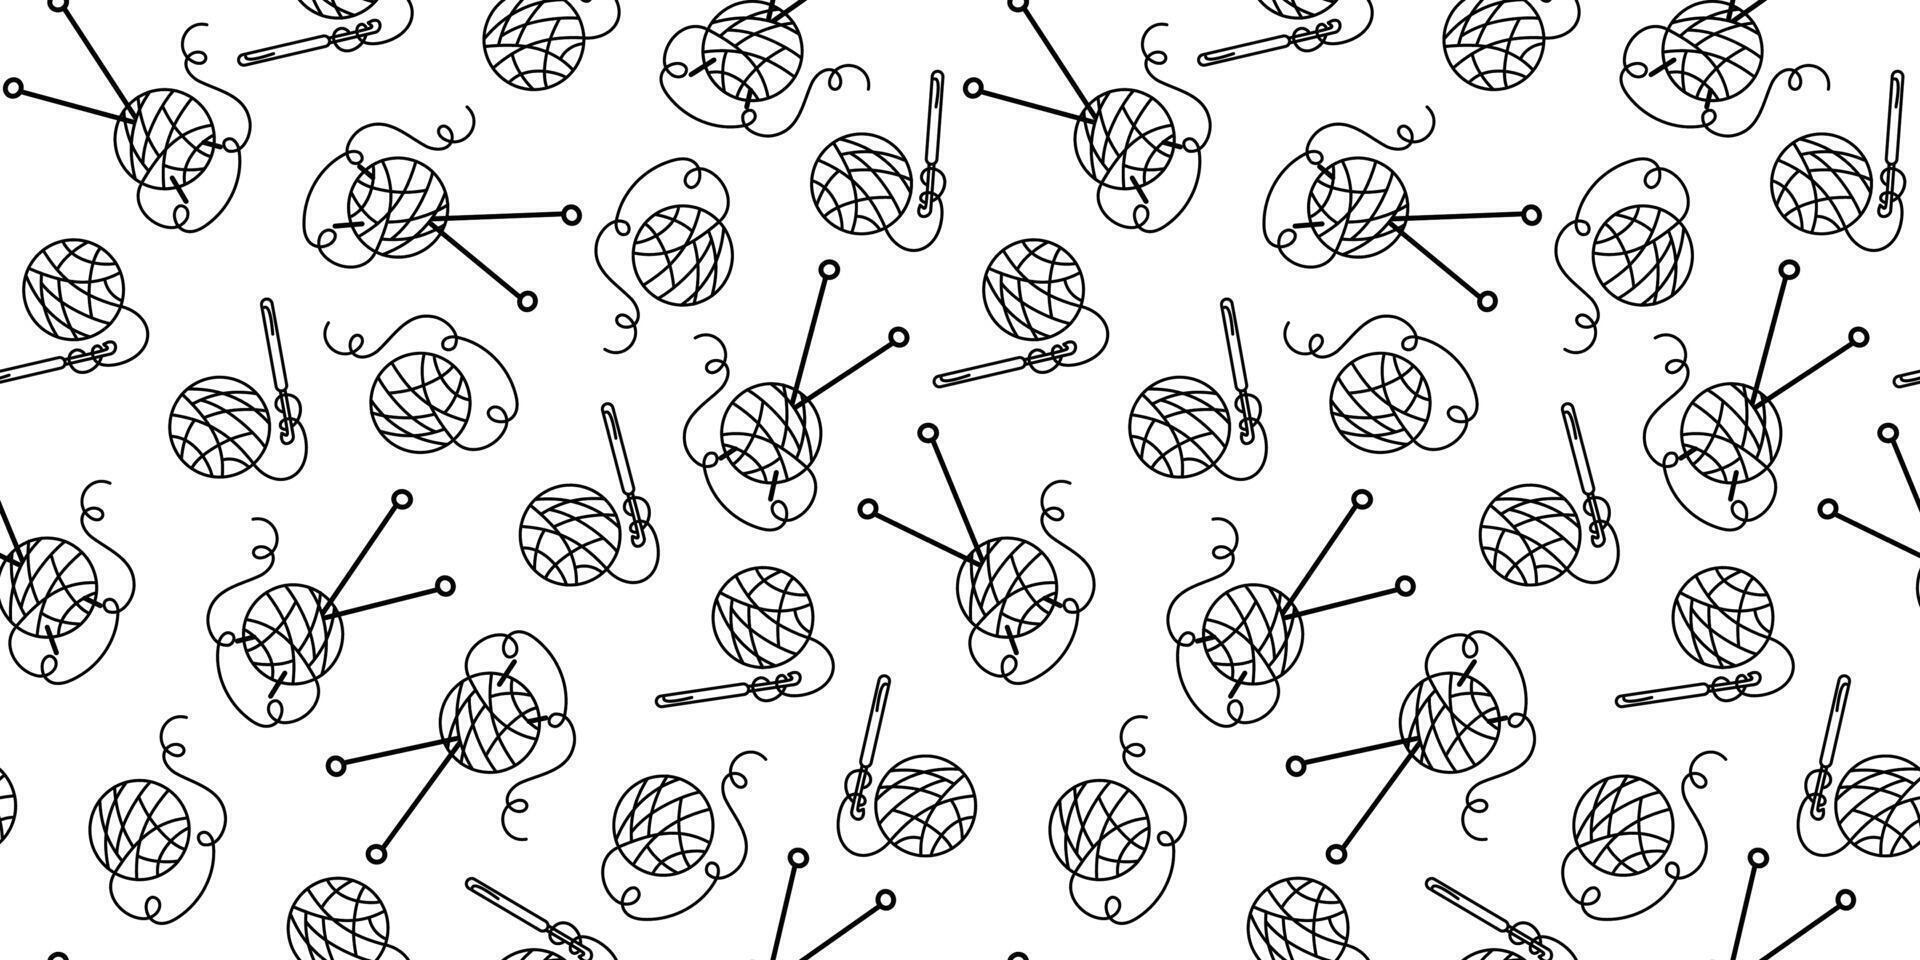 Pattern. Threads in a skein. A ball of wool. Hobbies, Crafts, Handmade. Doodle style. Items and tools for knitting. Vector seamless background.